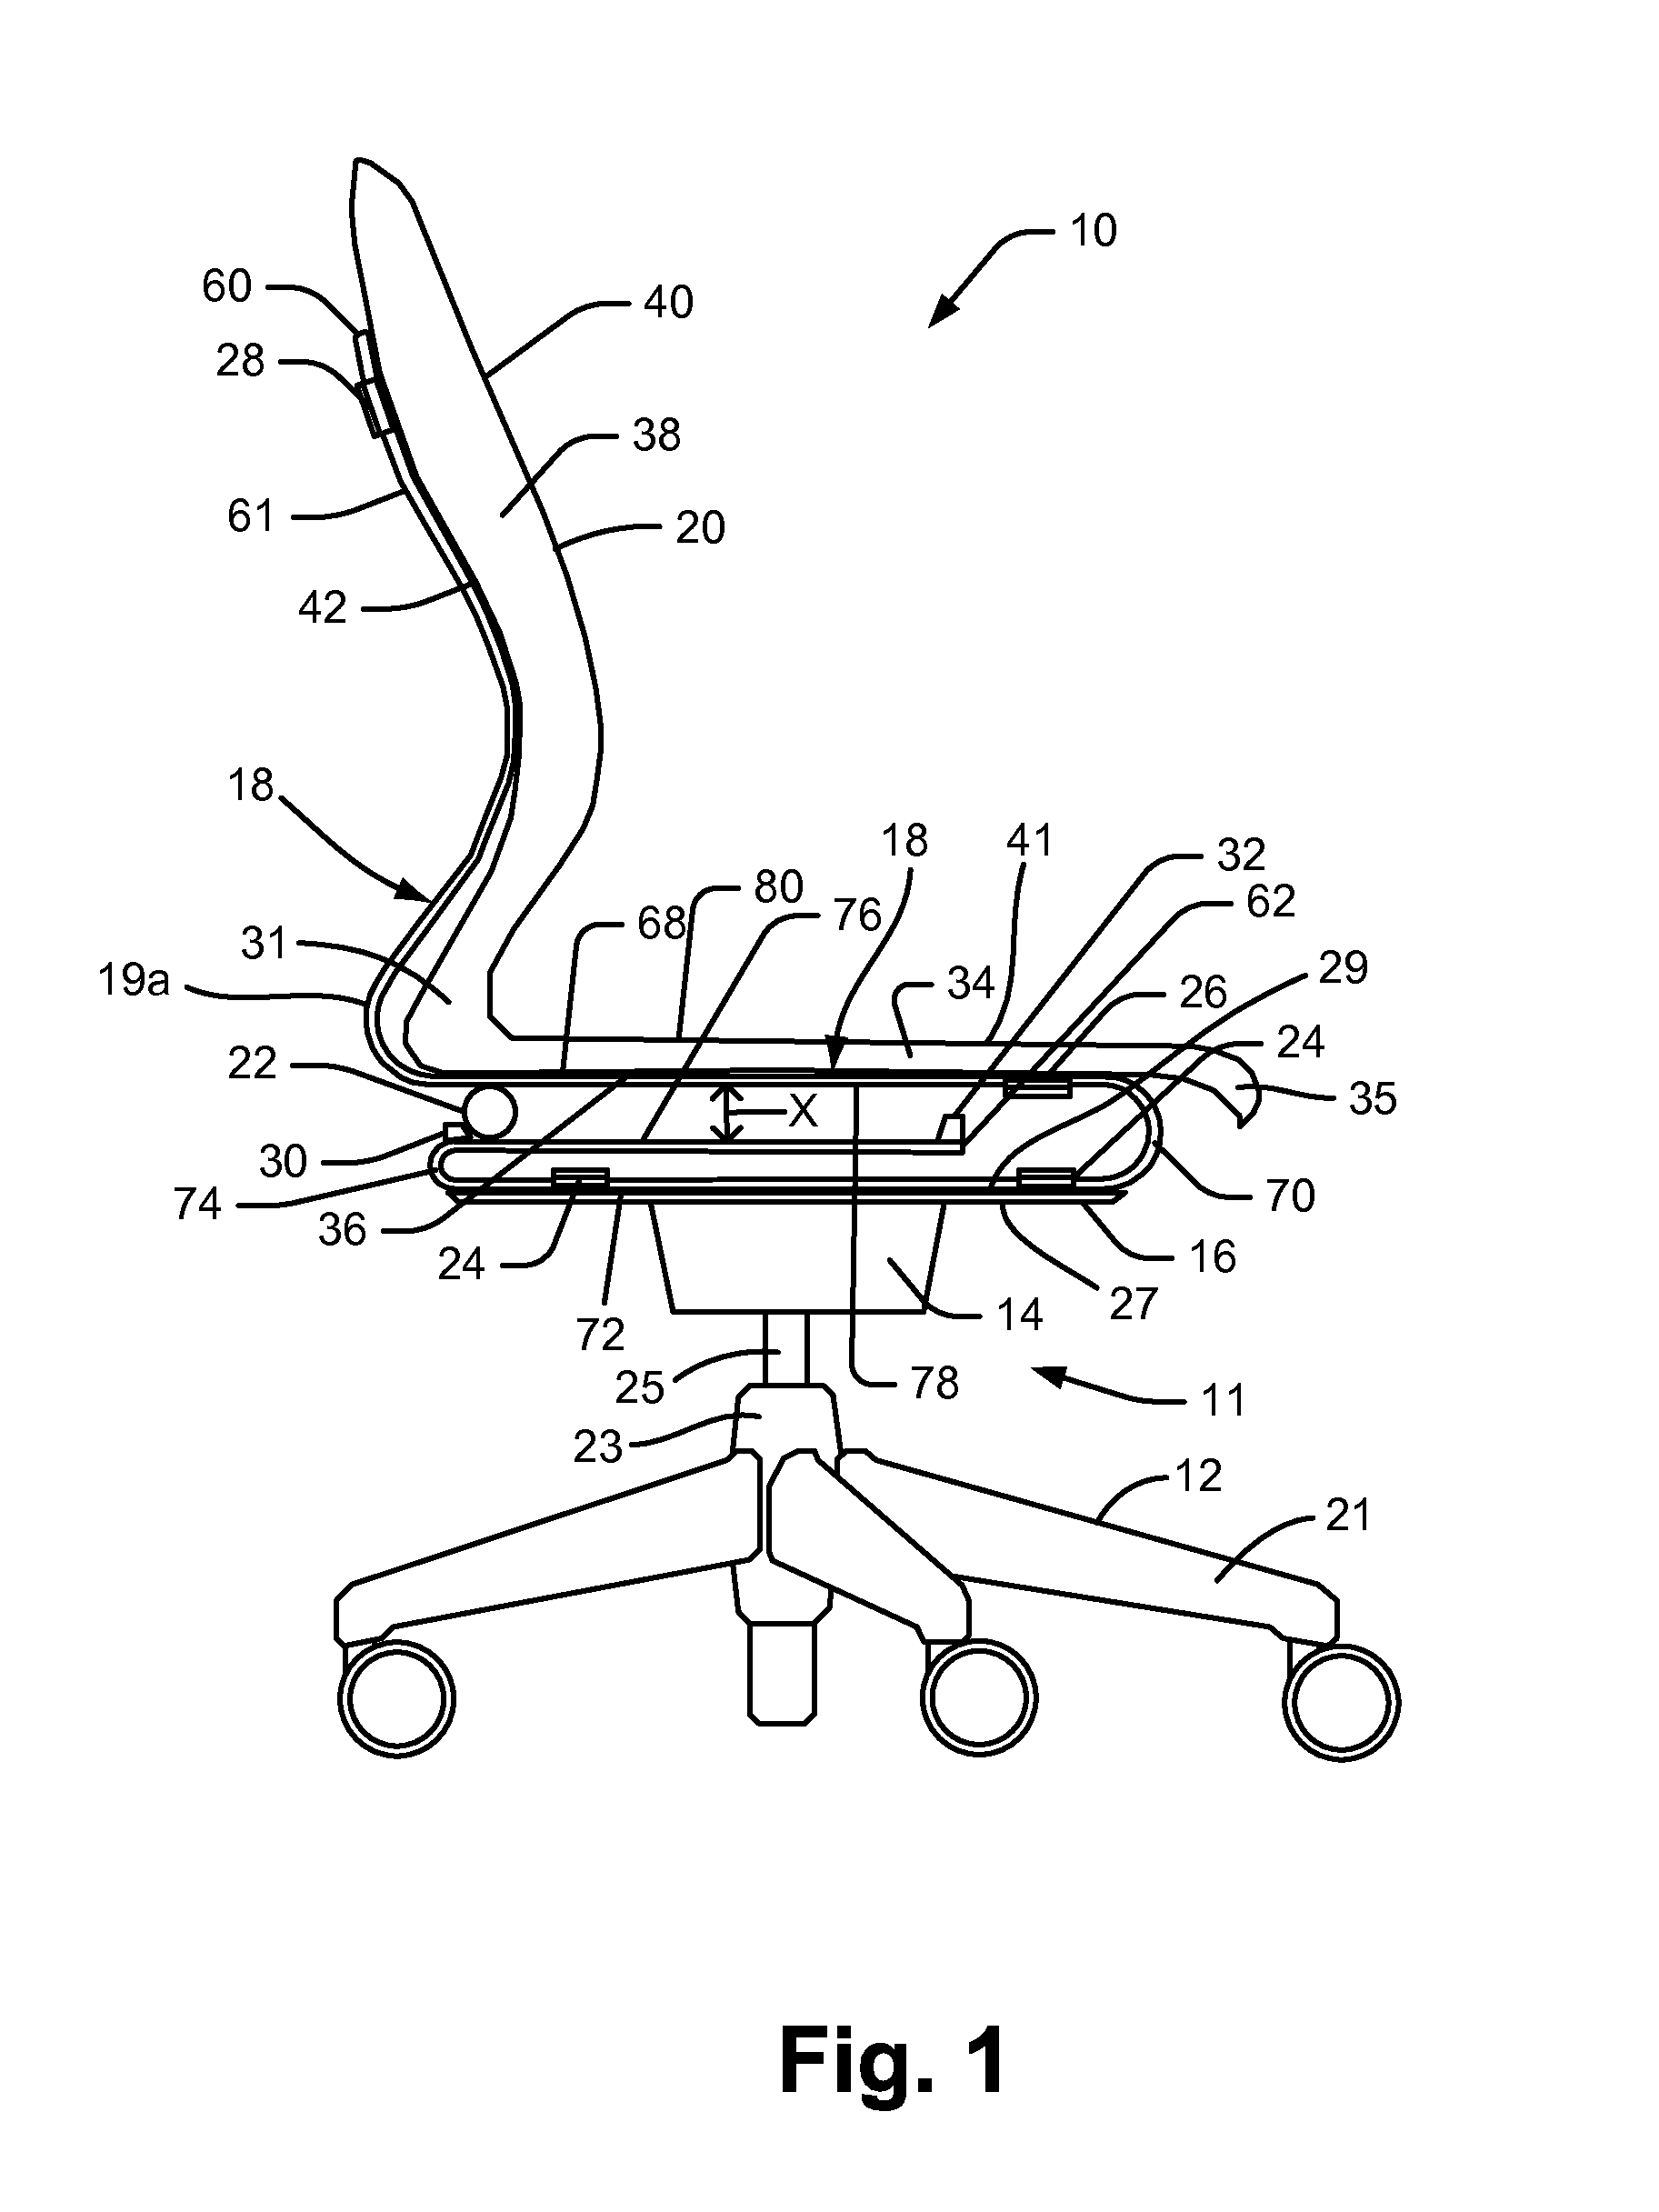 Recline adjustment system for chair